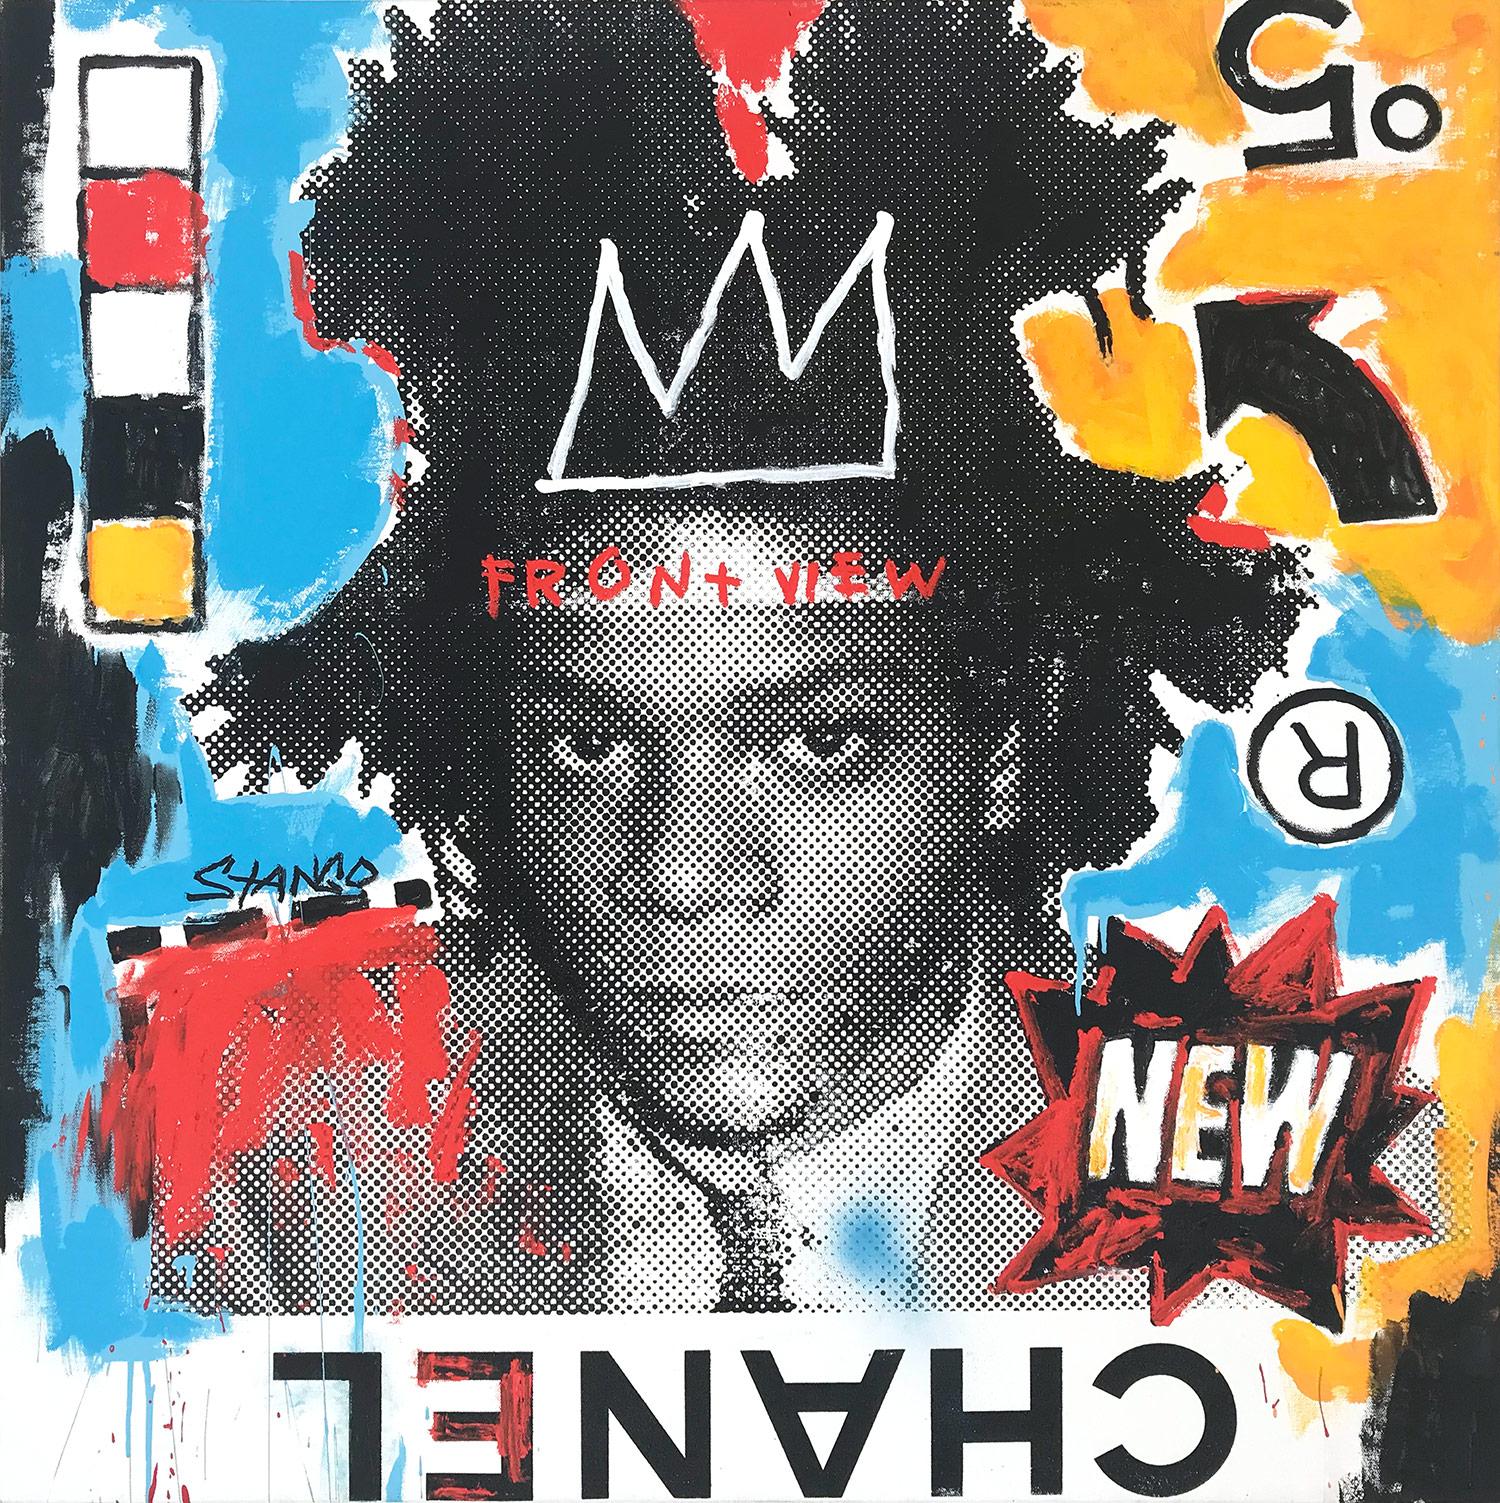 John Stango Abstract Painting - "SAMO Front View" Chanel No.5 & Jean Michel Basquiat Acrylic Painting on Canvas